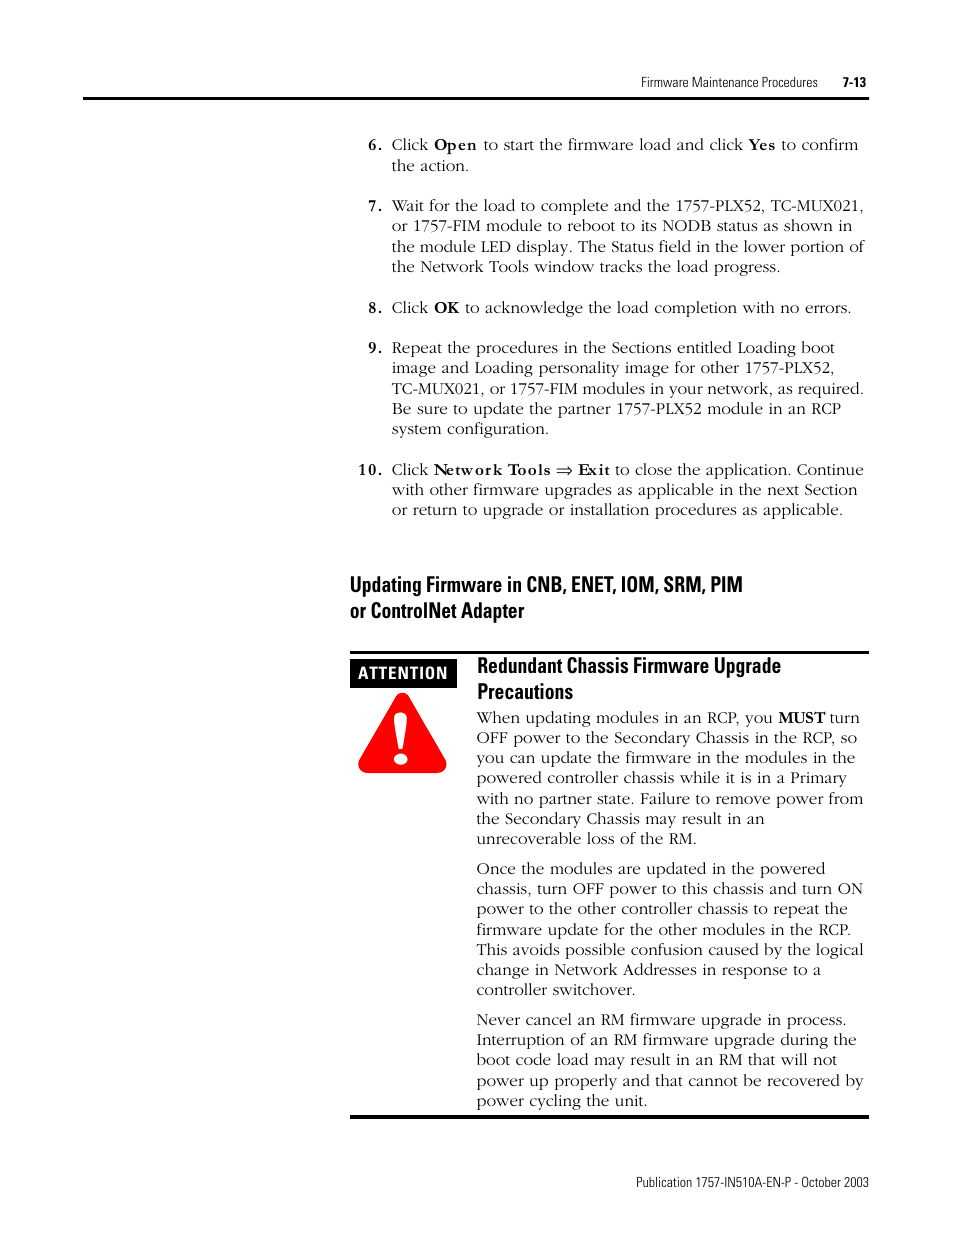 Redundant chassis firmware upgrade precautions, Updating firmware in cnb, enet, iom, srm, pim | Rockwell Automation 1757-SWKIT5100 ProcessLogix R510.0 Installation and Upgrade Guide User Manual | Page 197 / 271